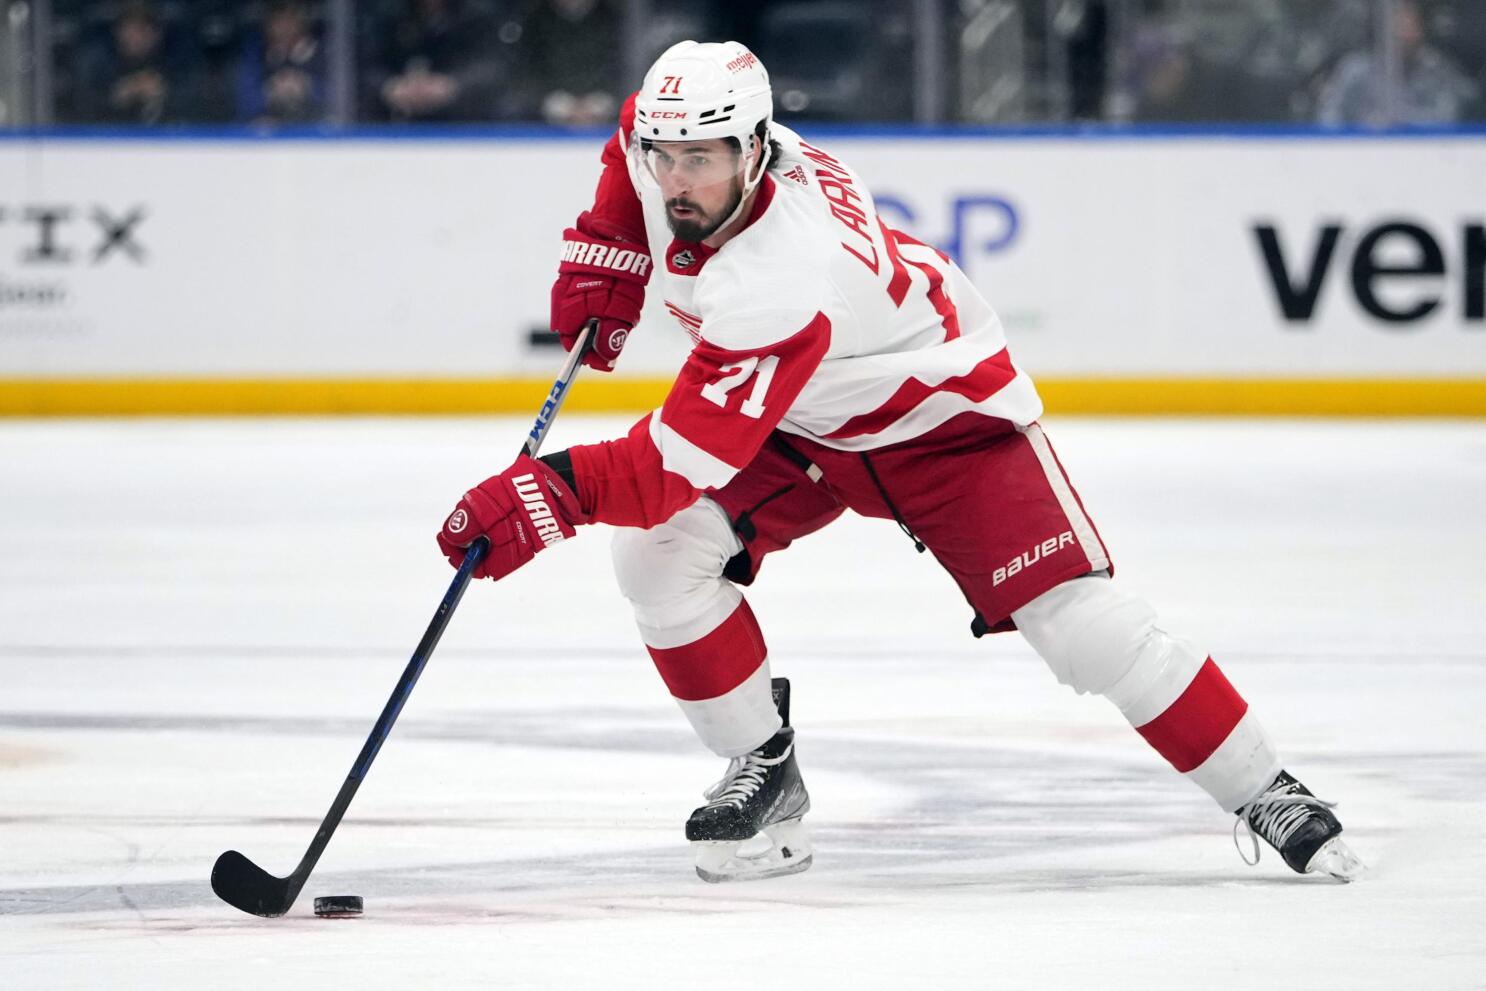 Detroit's Larkin wins rookie of the month for November - NBC Sports